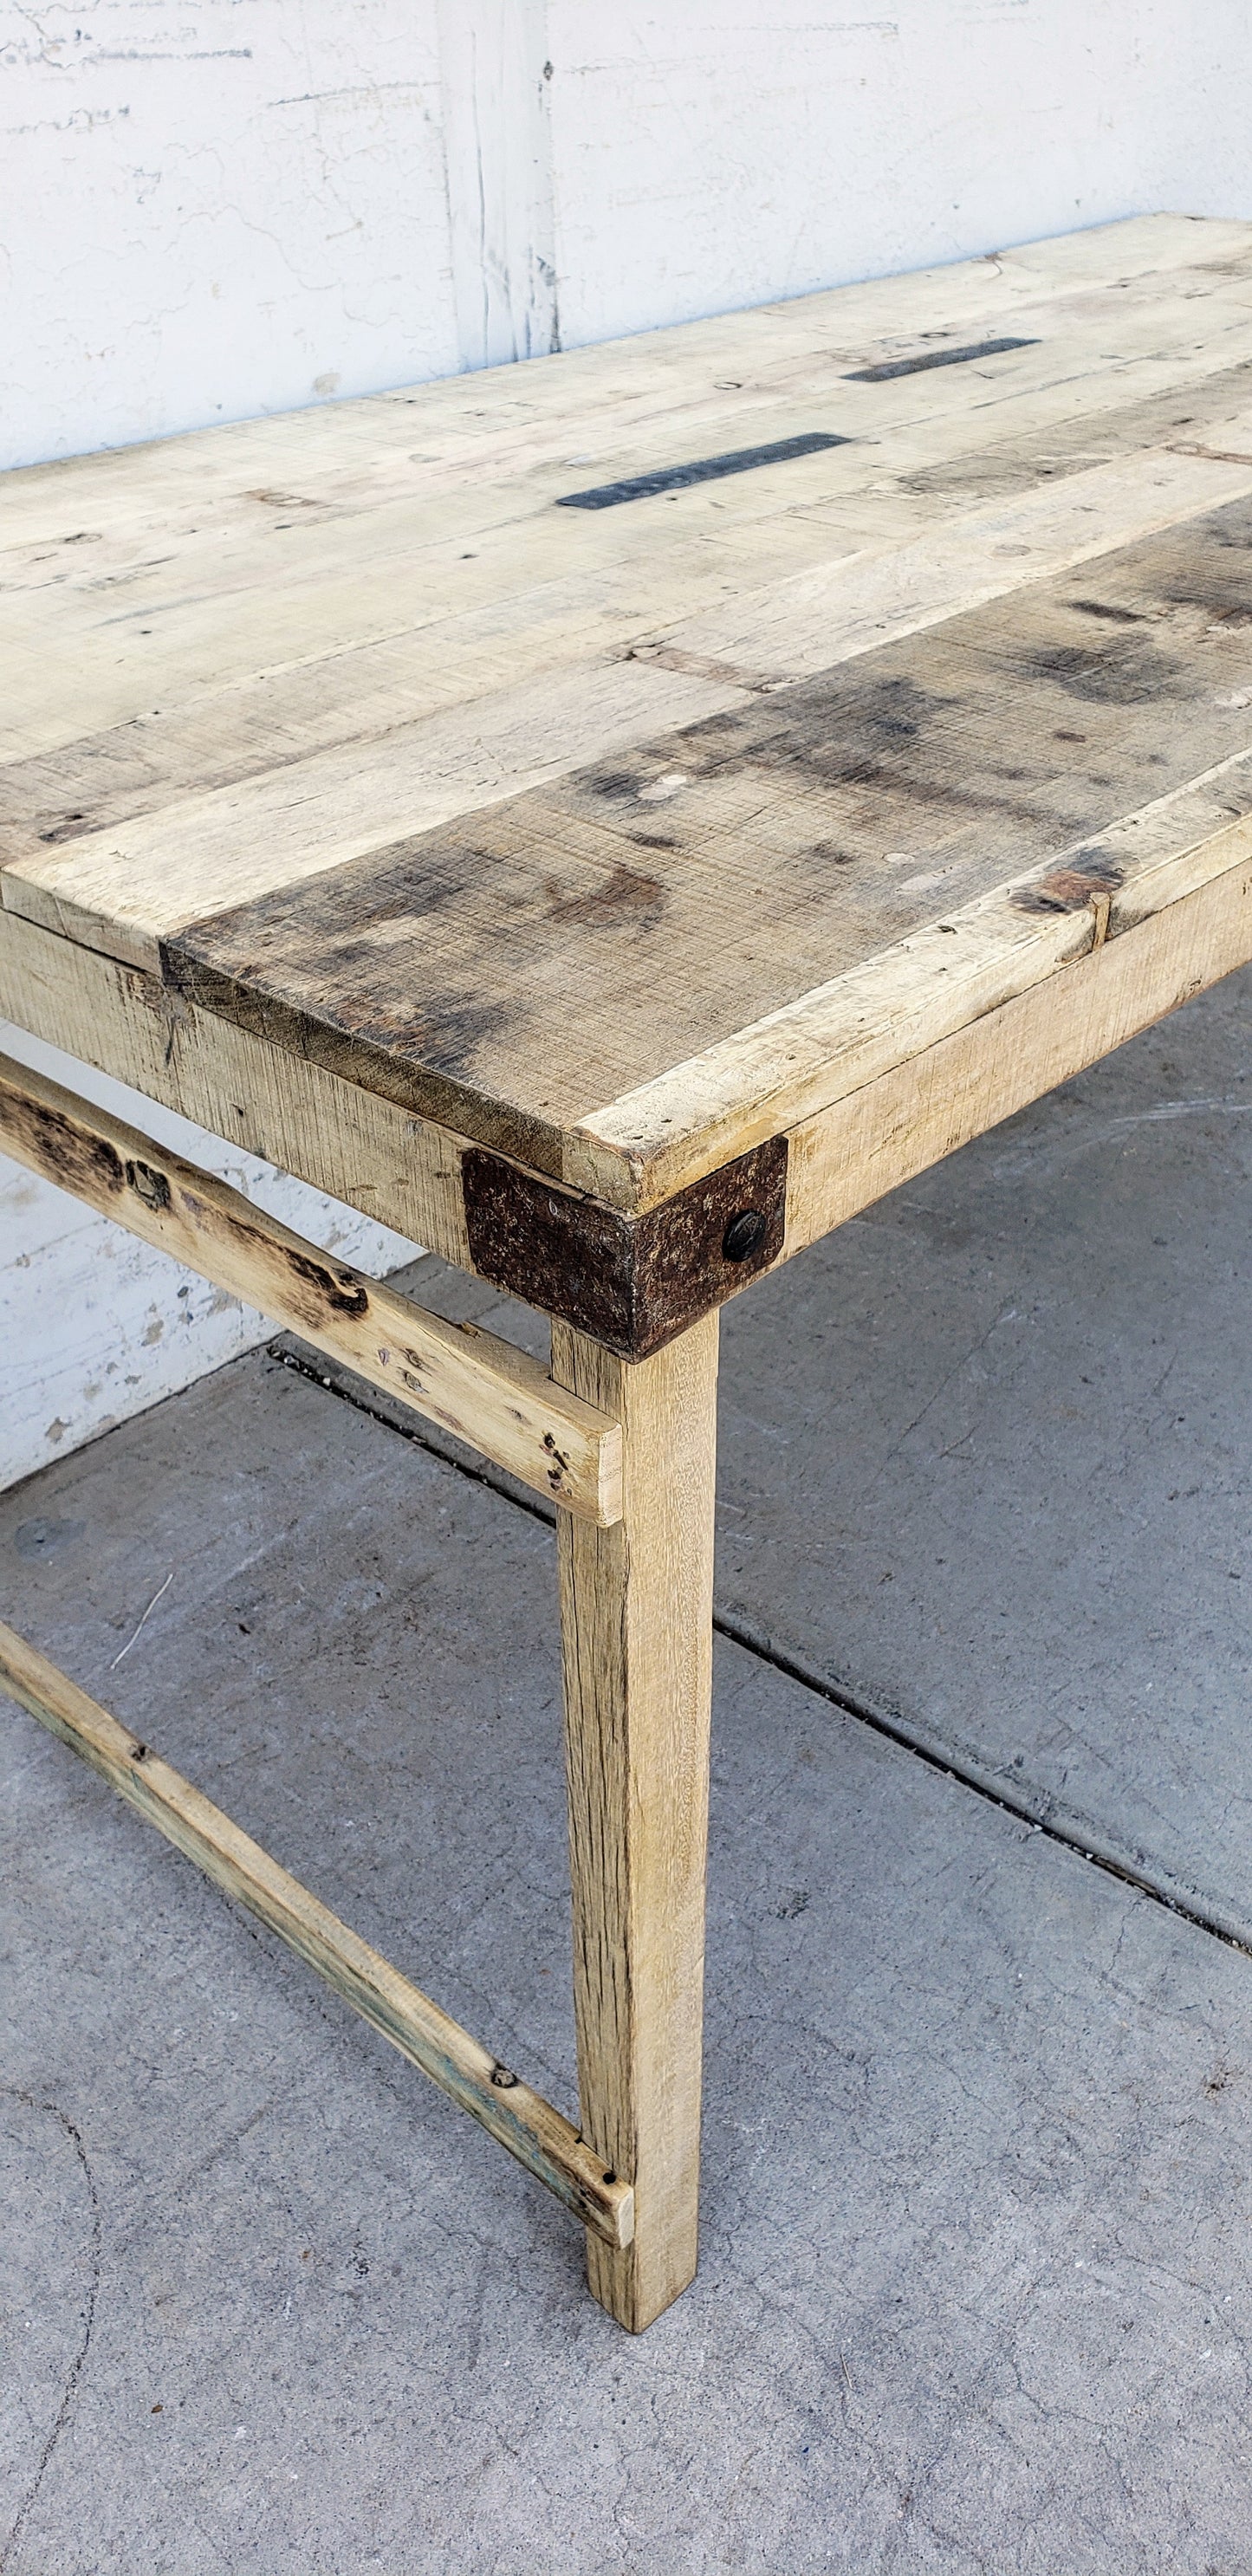 Stripped Wood Folding Table